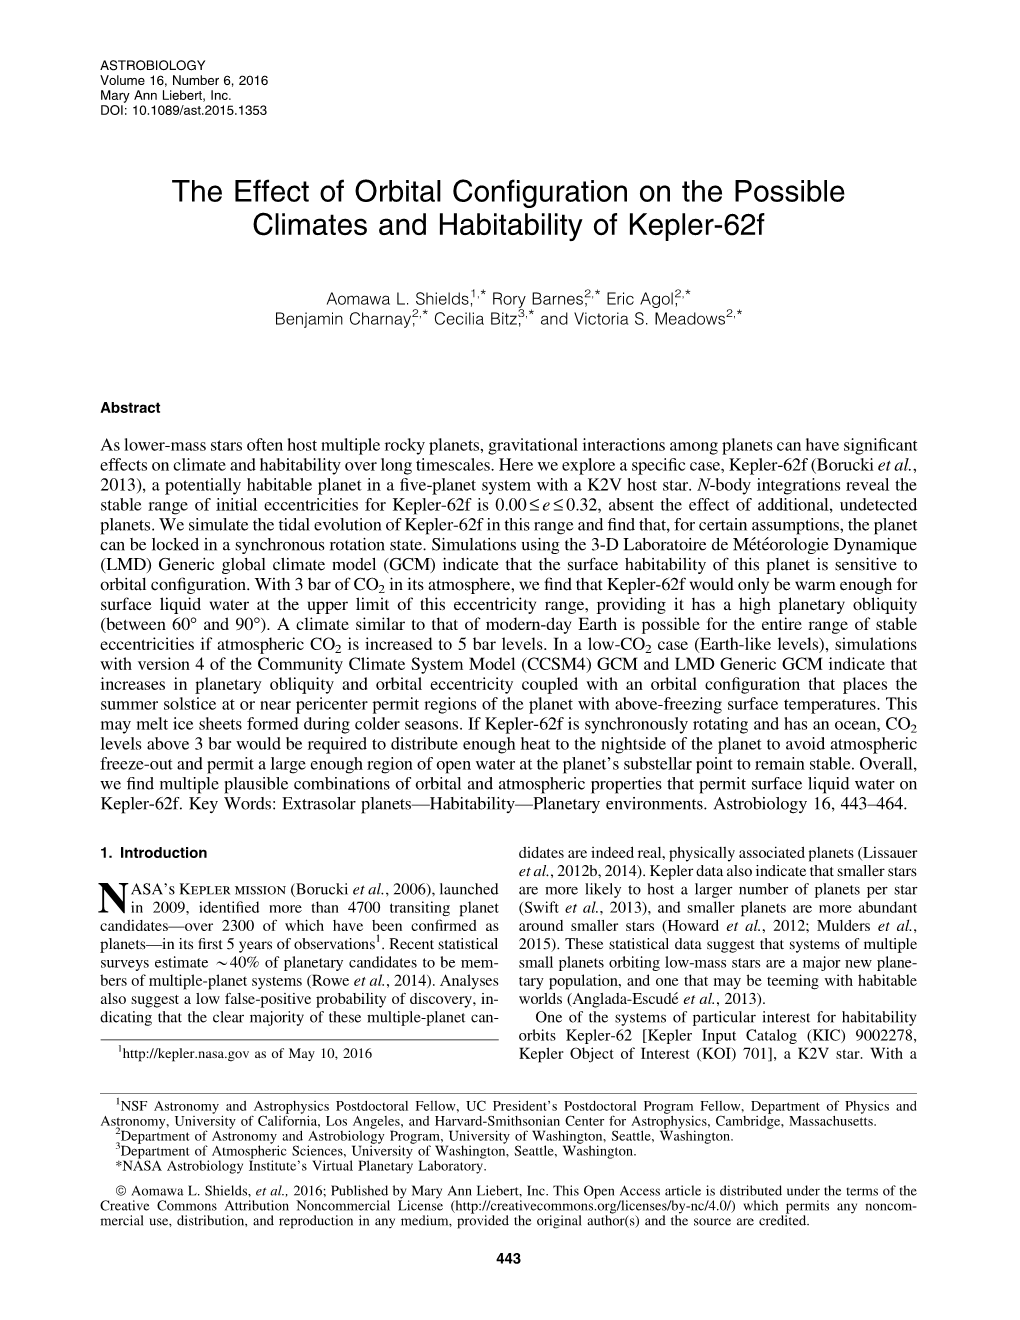 The Effect of Orbital Configuration on the Possible Climates and Habitability of Kepler-62F